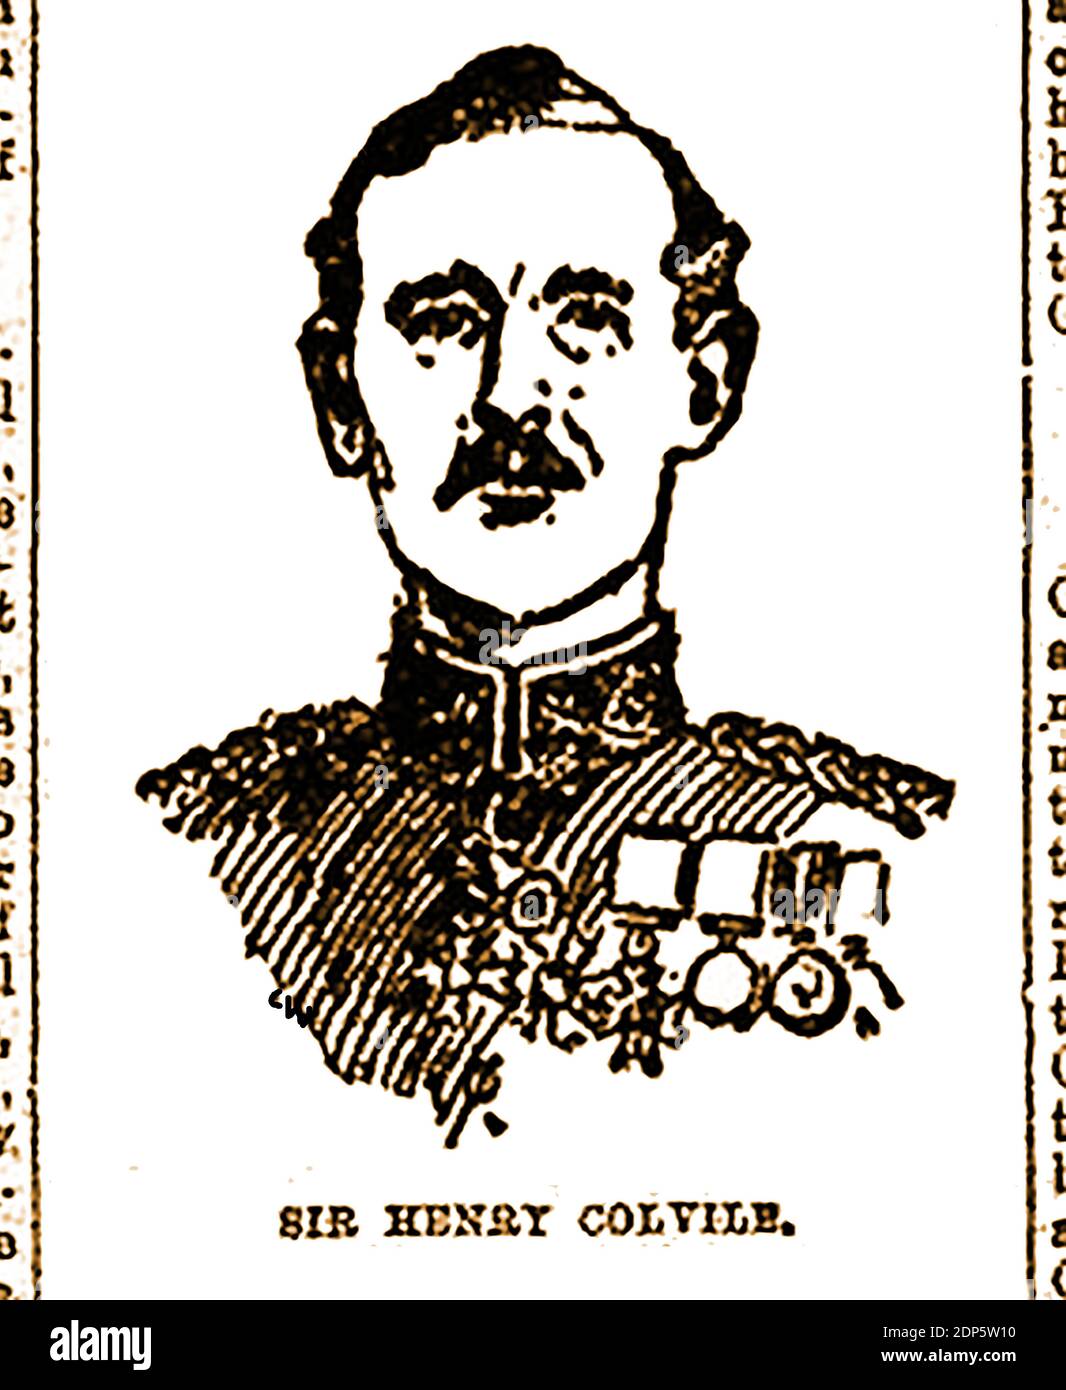 A 1900 press portrait of  English soldier Sir Henry Colvile. ------- Major-General Sir Henry Edward Colvile, KCMG, CB (1852 – 1907)  was a  Grenadier Guard in 1870. He was appointed A.D.C. to General Sir Leicester Smyth, commanding  forces in South Africa, in 1880 as well as serving  in the Intelligence Department of the Suakin Expedition of 1884. He fought at the Battles of El Teb and Tamai and was also employed on special service in the Sudan prior to the Nile Expedition of 1884-85. Stock Photo